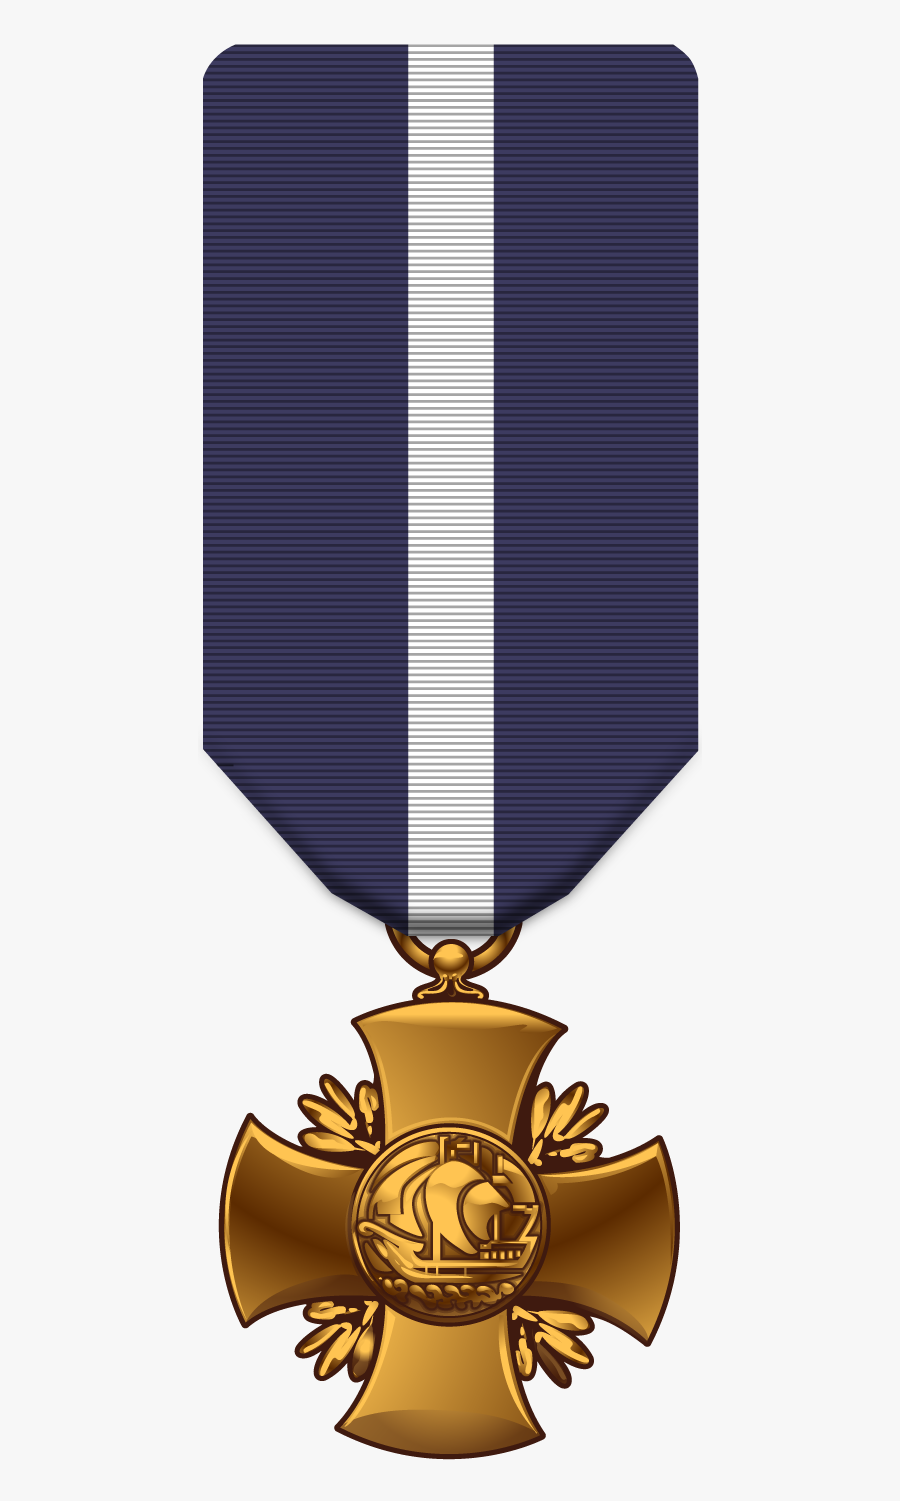 Air Force Commendation Medal - Navy Cross Medal Clipart, Transparent Clipart